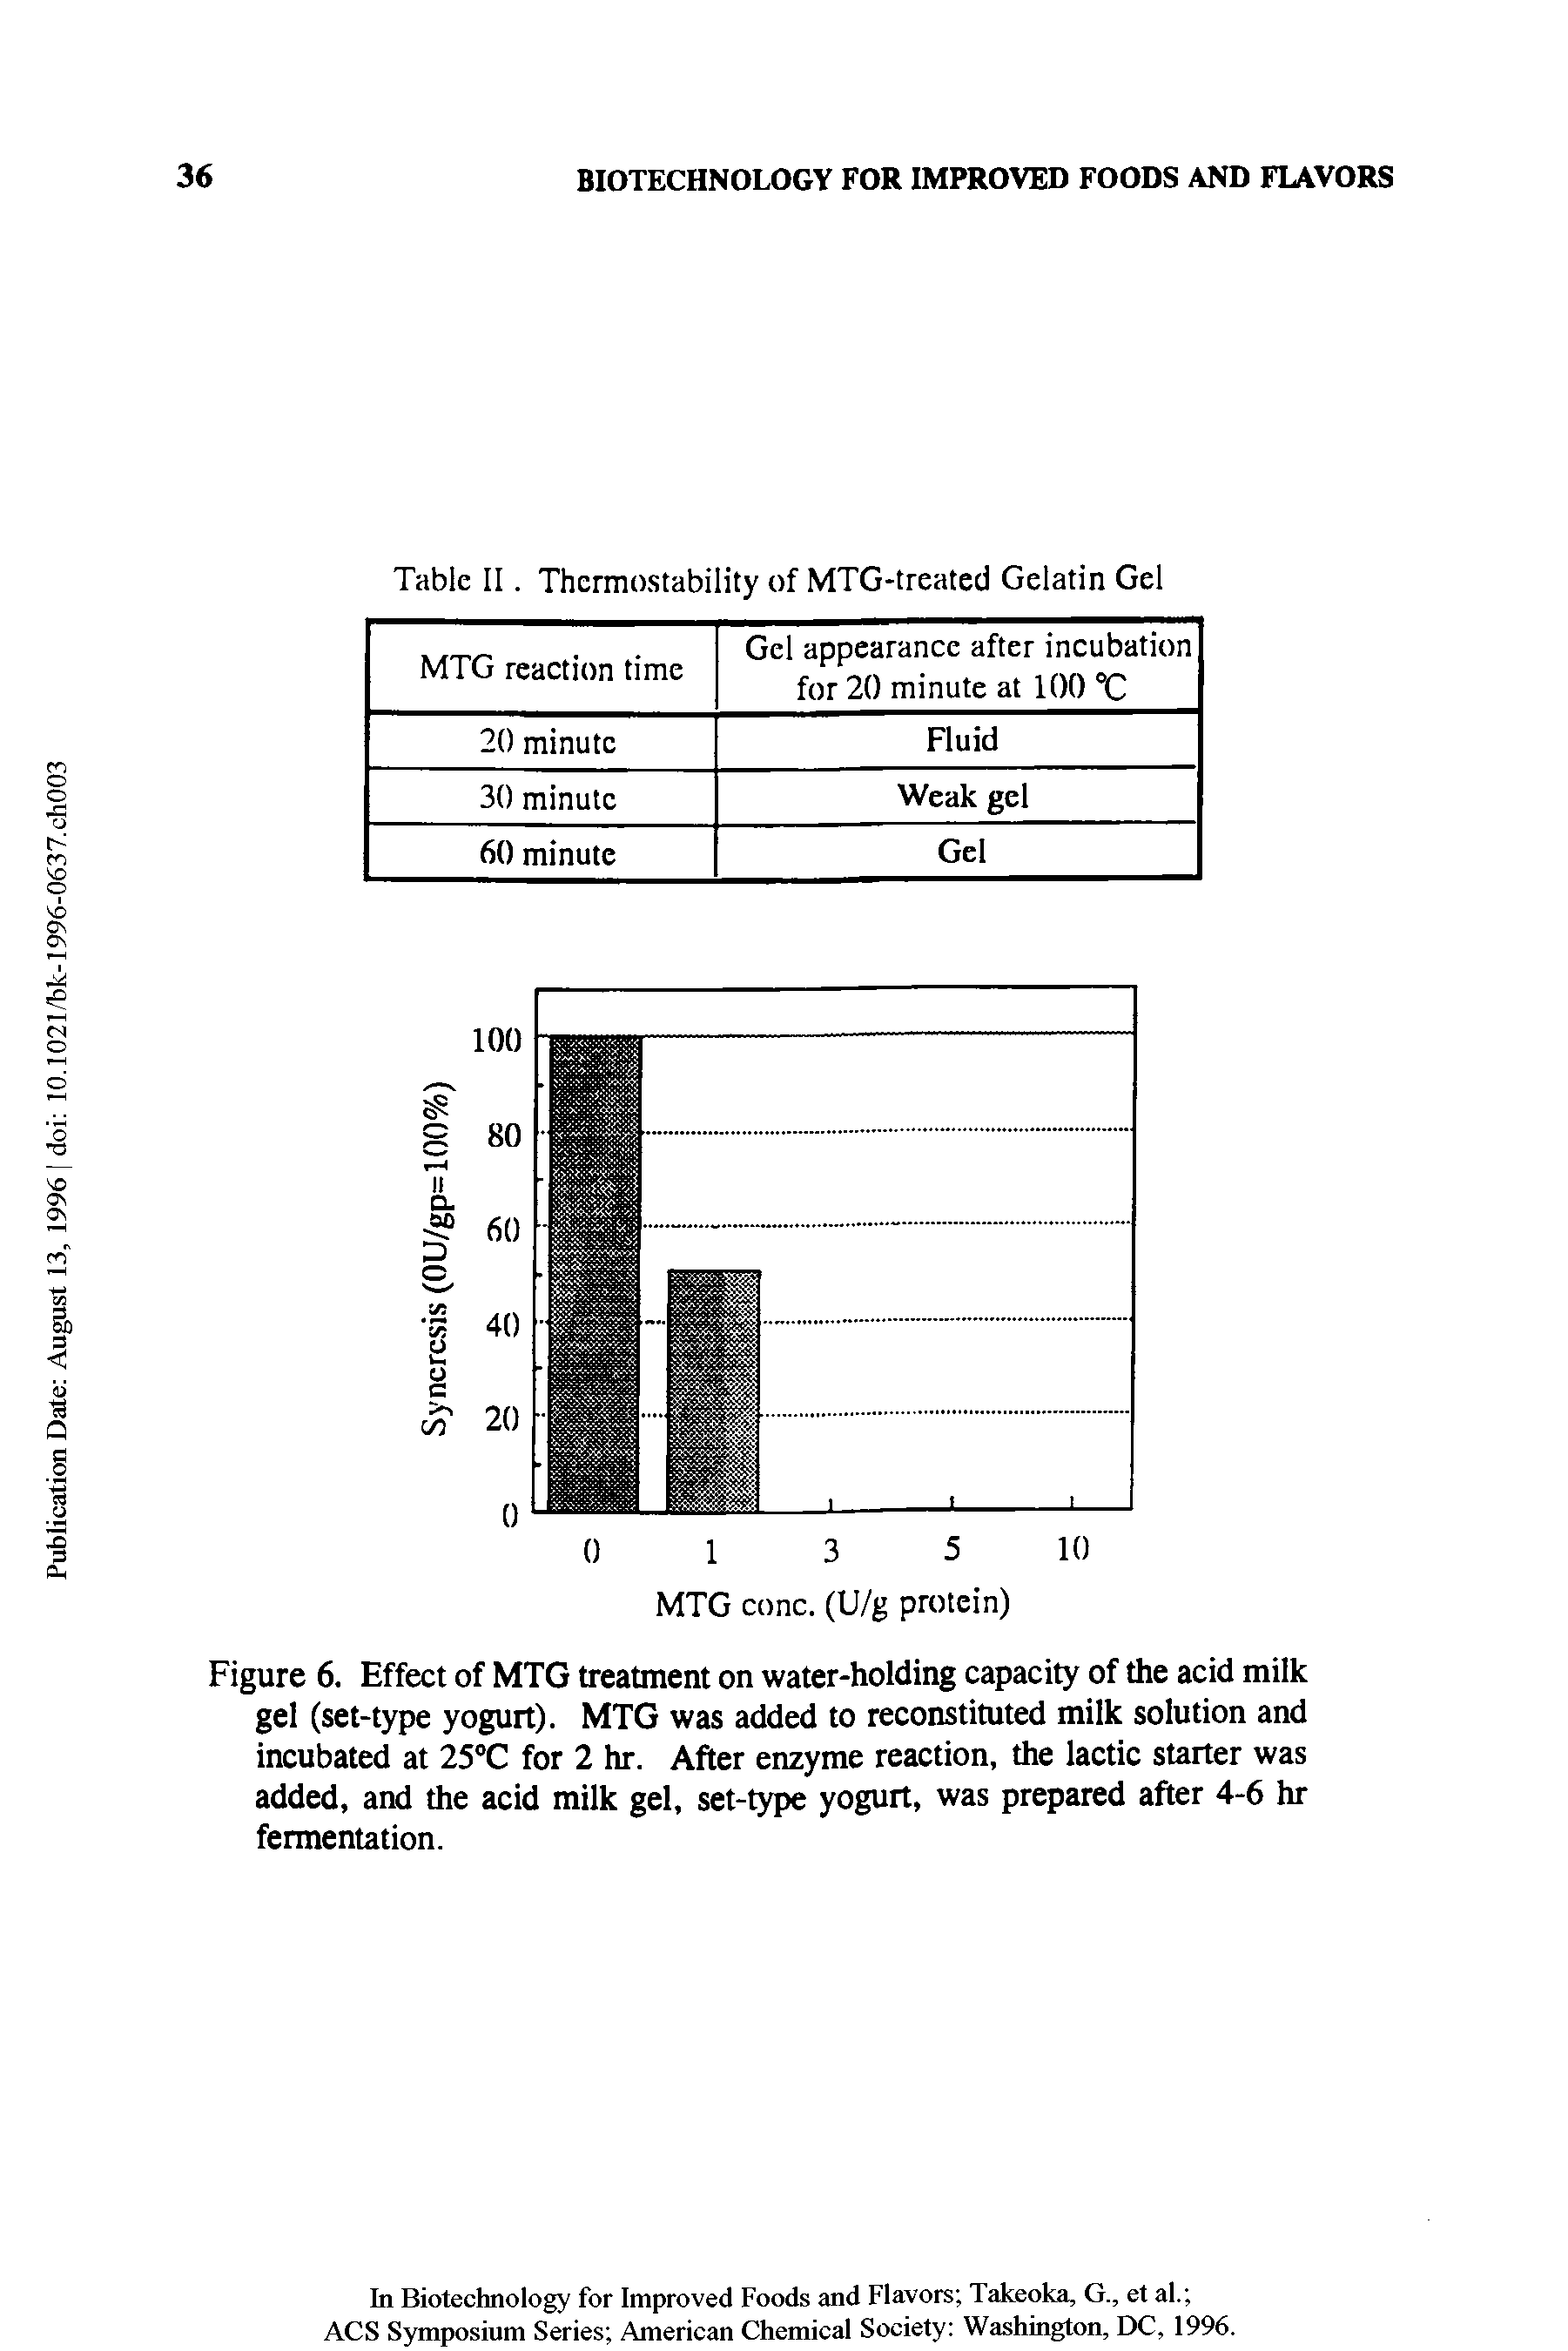 Figure 6. Effect of MTG treatment on water-holding capacity of the acid milk gel (set-type yogurt). MTG was added to reconstituted milk solution and incubated at 25 C for 2 hr. After enzyme reaction, the lactic starter was added, and the acid milk gel, set-type yogurt, was prepared after 4-6 hr fermentation.